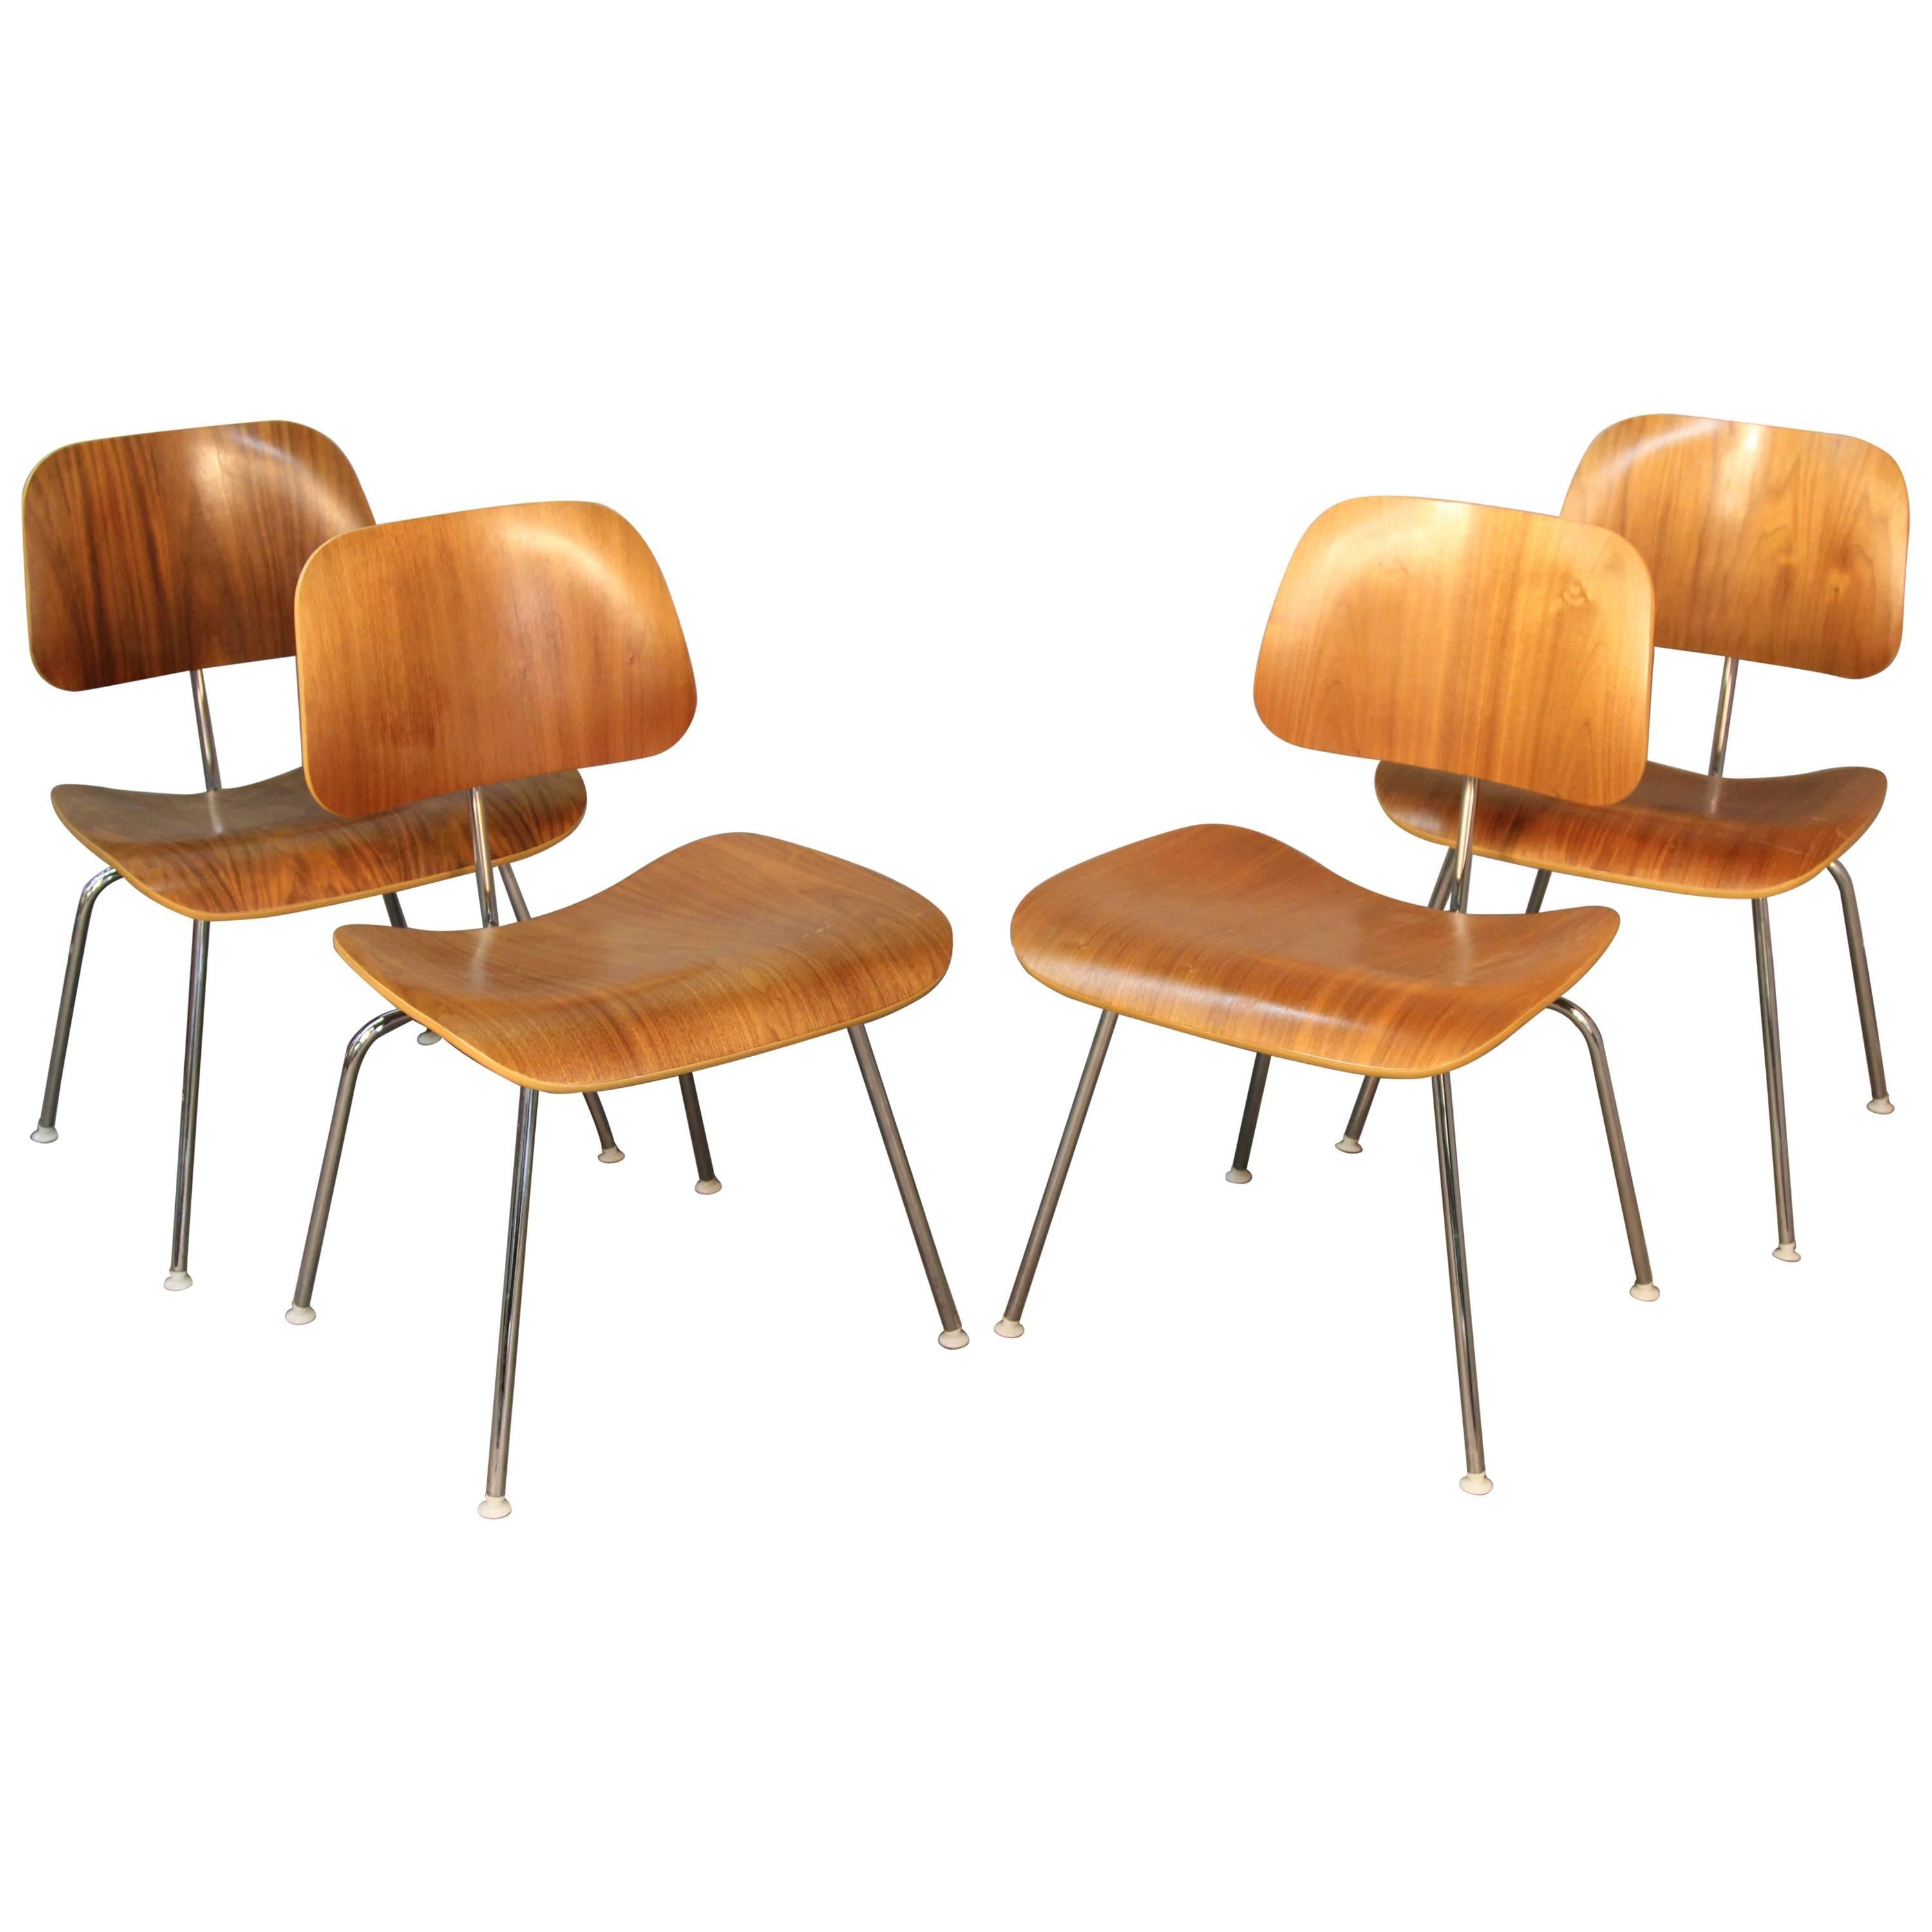 Set of Four Eames DCM Chairs for Herman Miller